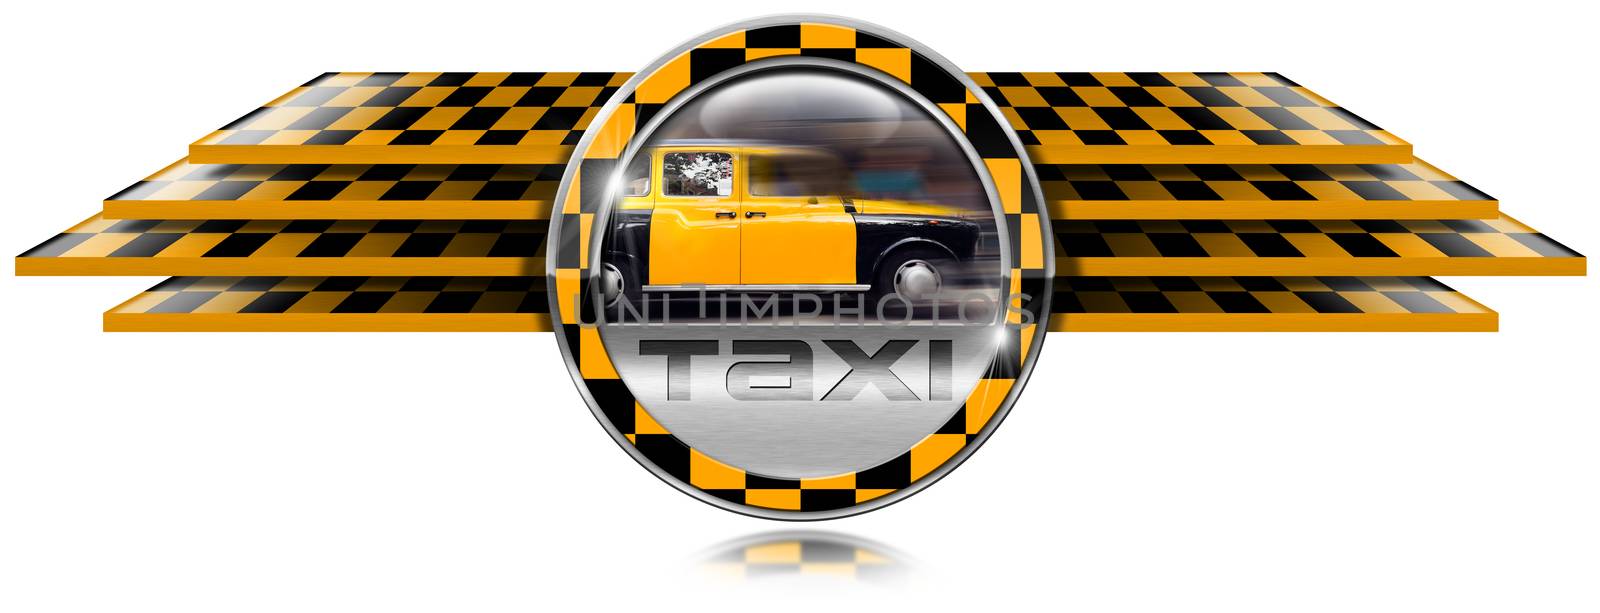 Taxi Service - Winged Metal Symbol by catalby